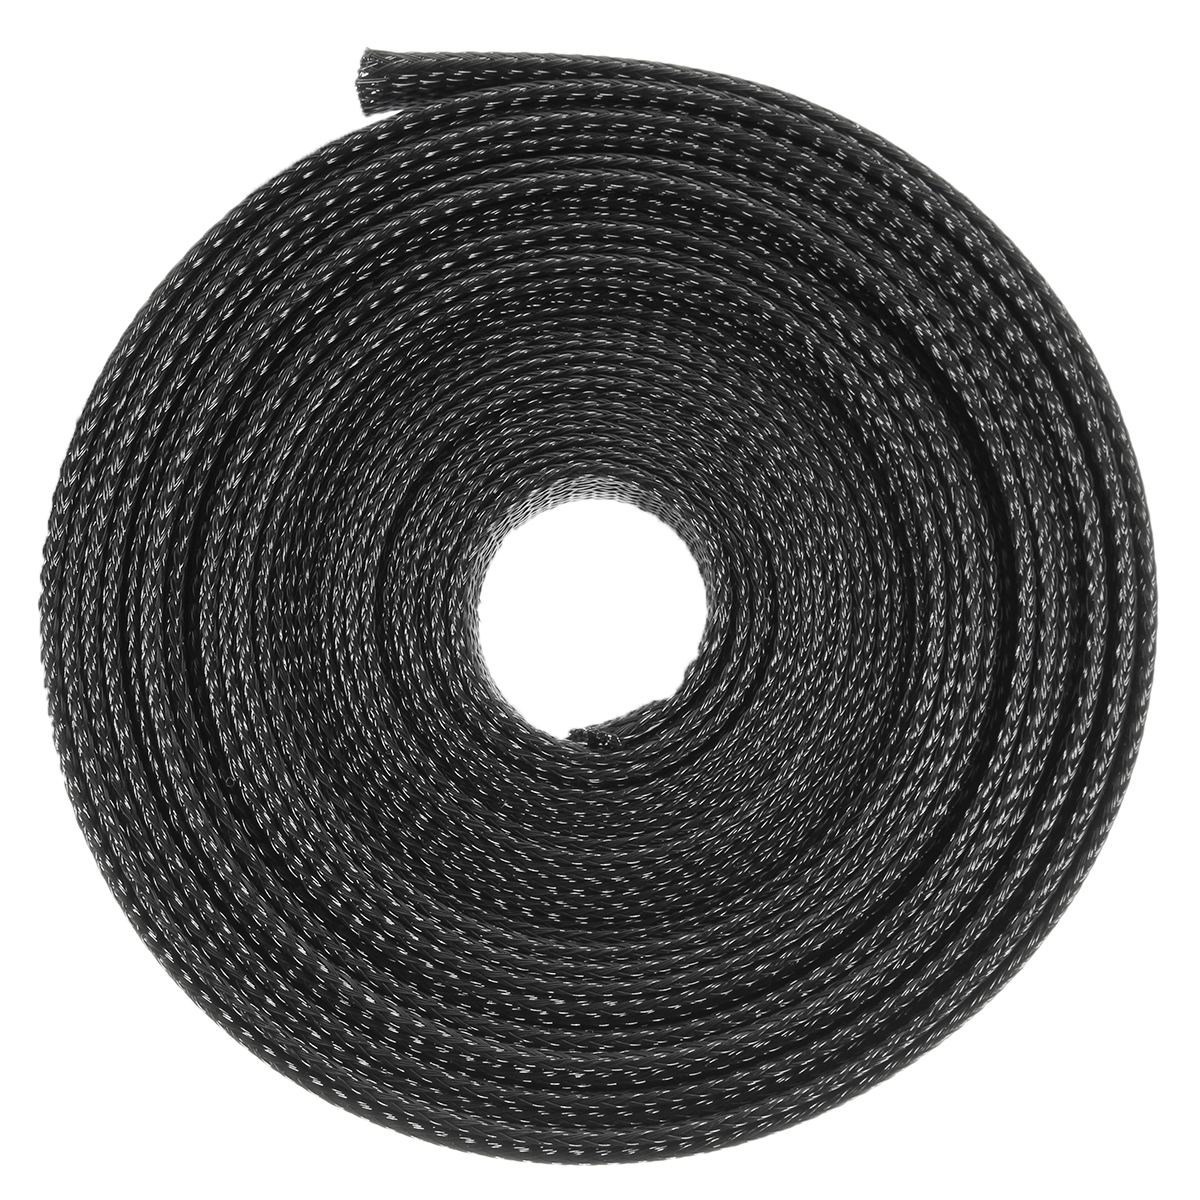 6m-8mm10mm12mm15mm20mm-Wire-Cable-Sheathing-Expandable-Sleeving-Braided-Loom-Tubing-Black-1179628-6